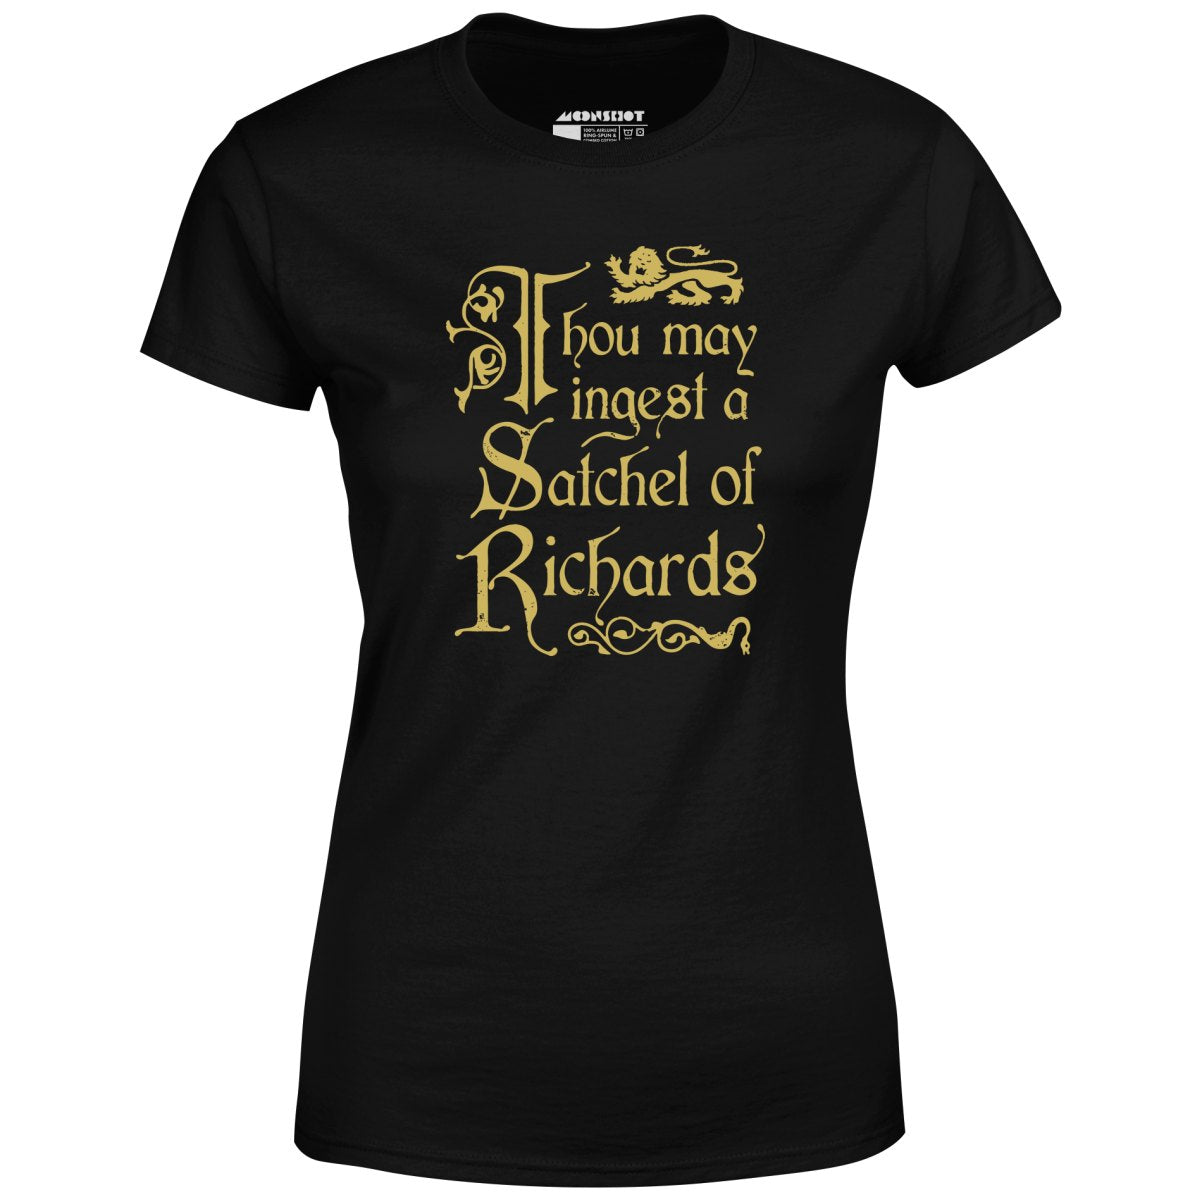 Thou May Ingest a Satchel of Richards - Women's T-Shirt